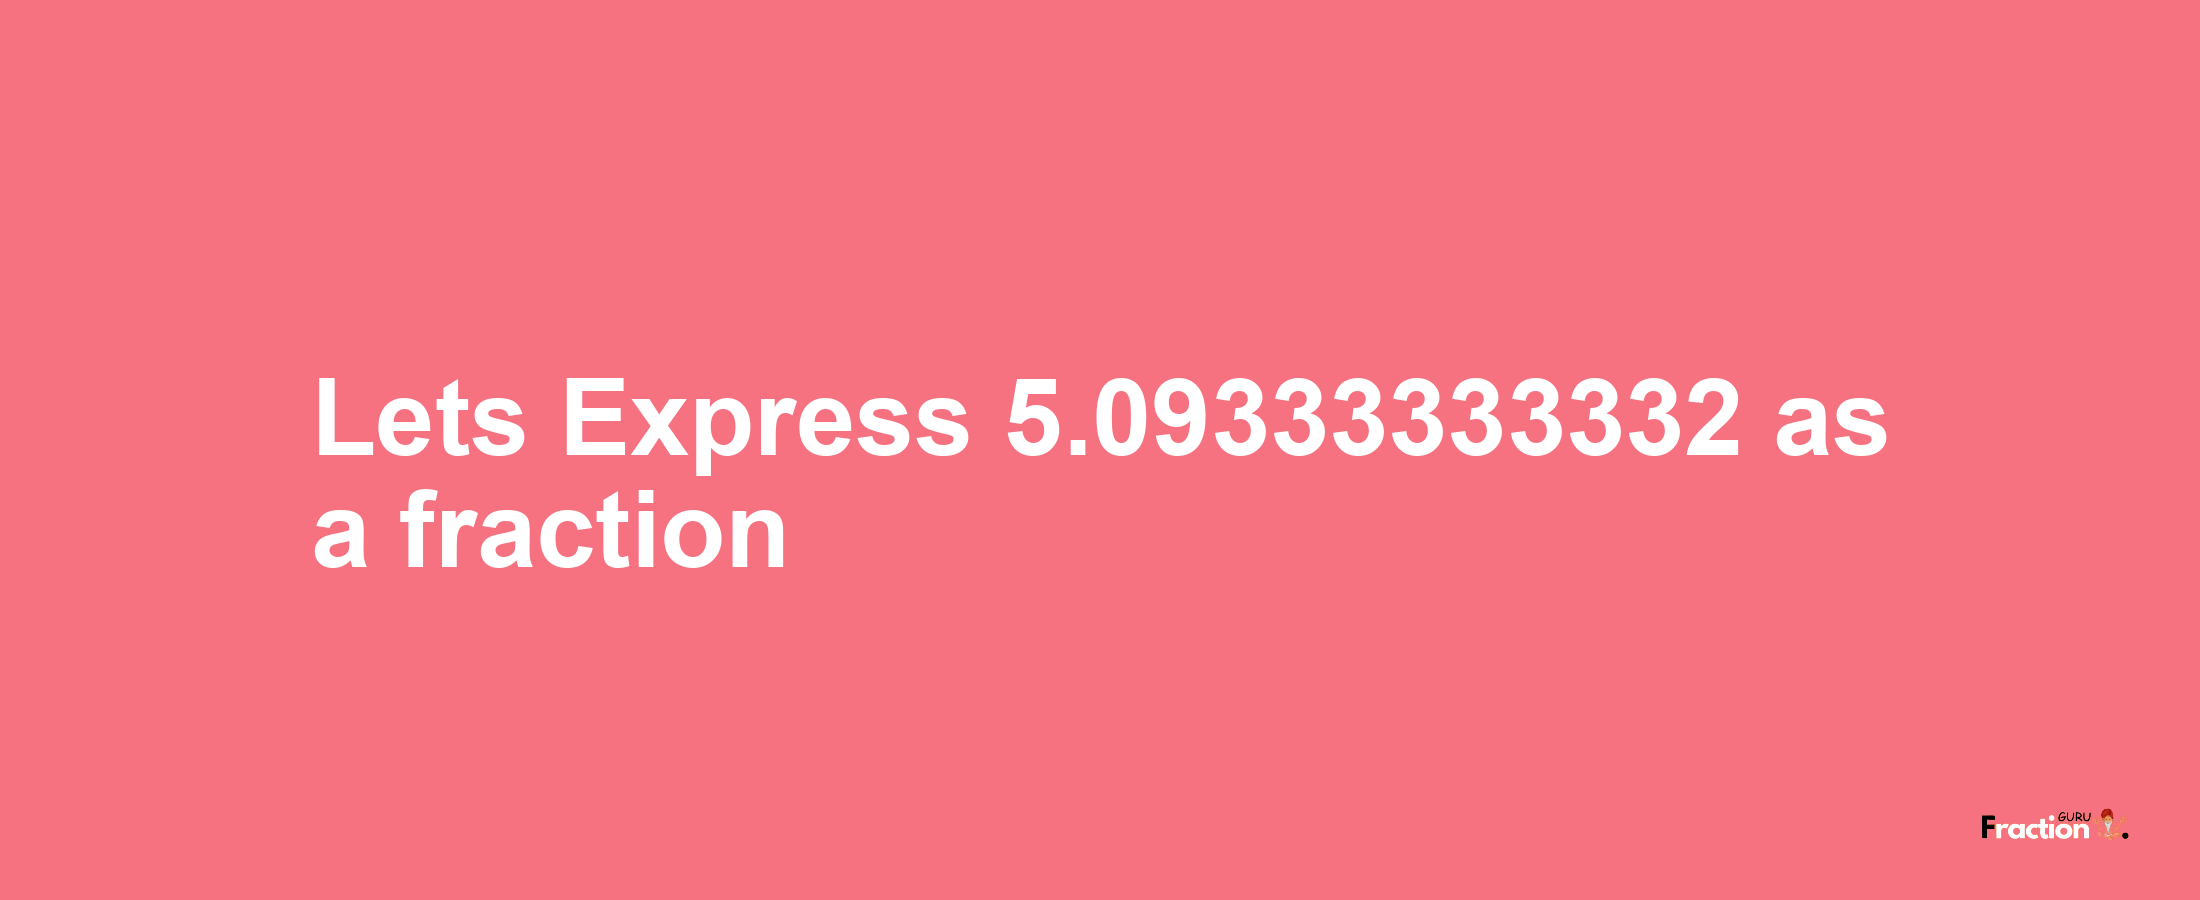 Lets Express 5.09333333332 as afraction